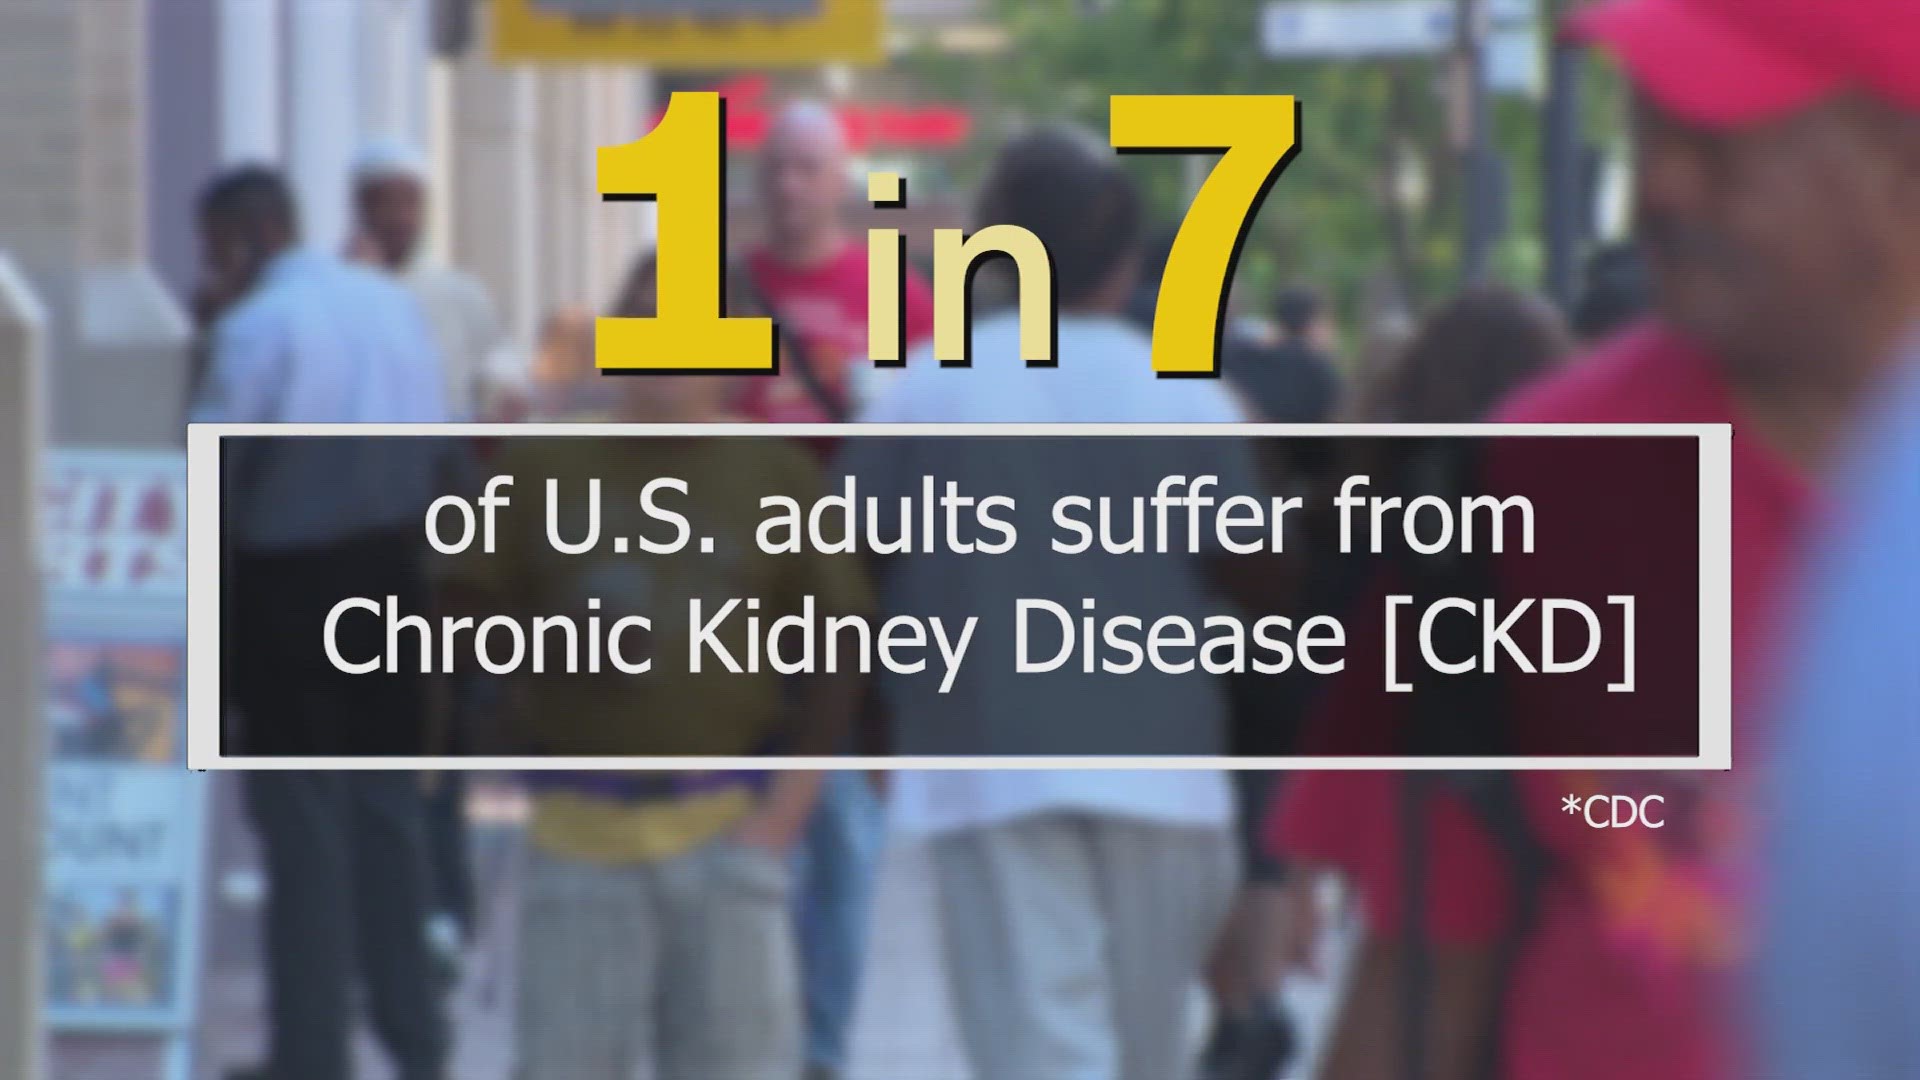 Kidney disease causes more deaths than breast and prostate cancer, according to the National Kidney Foundation.